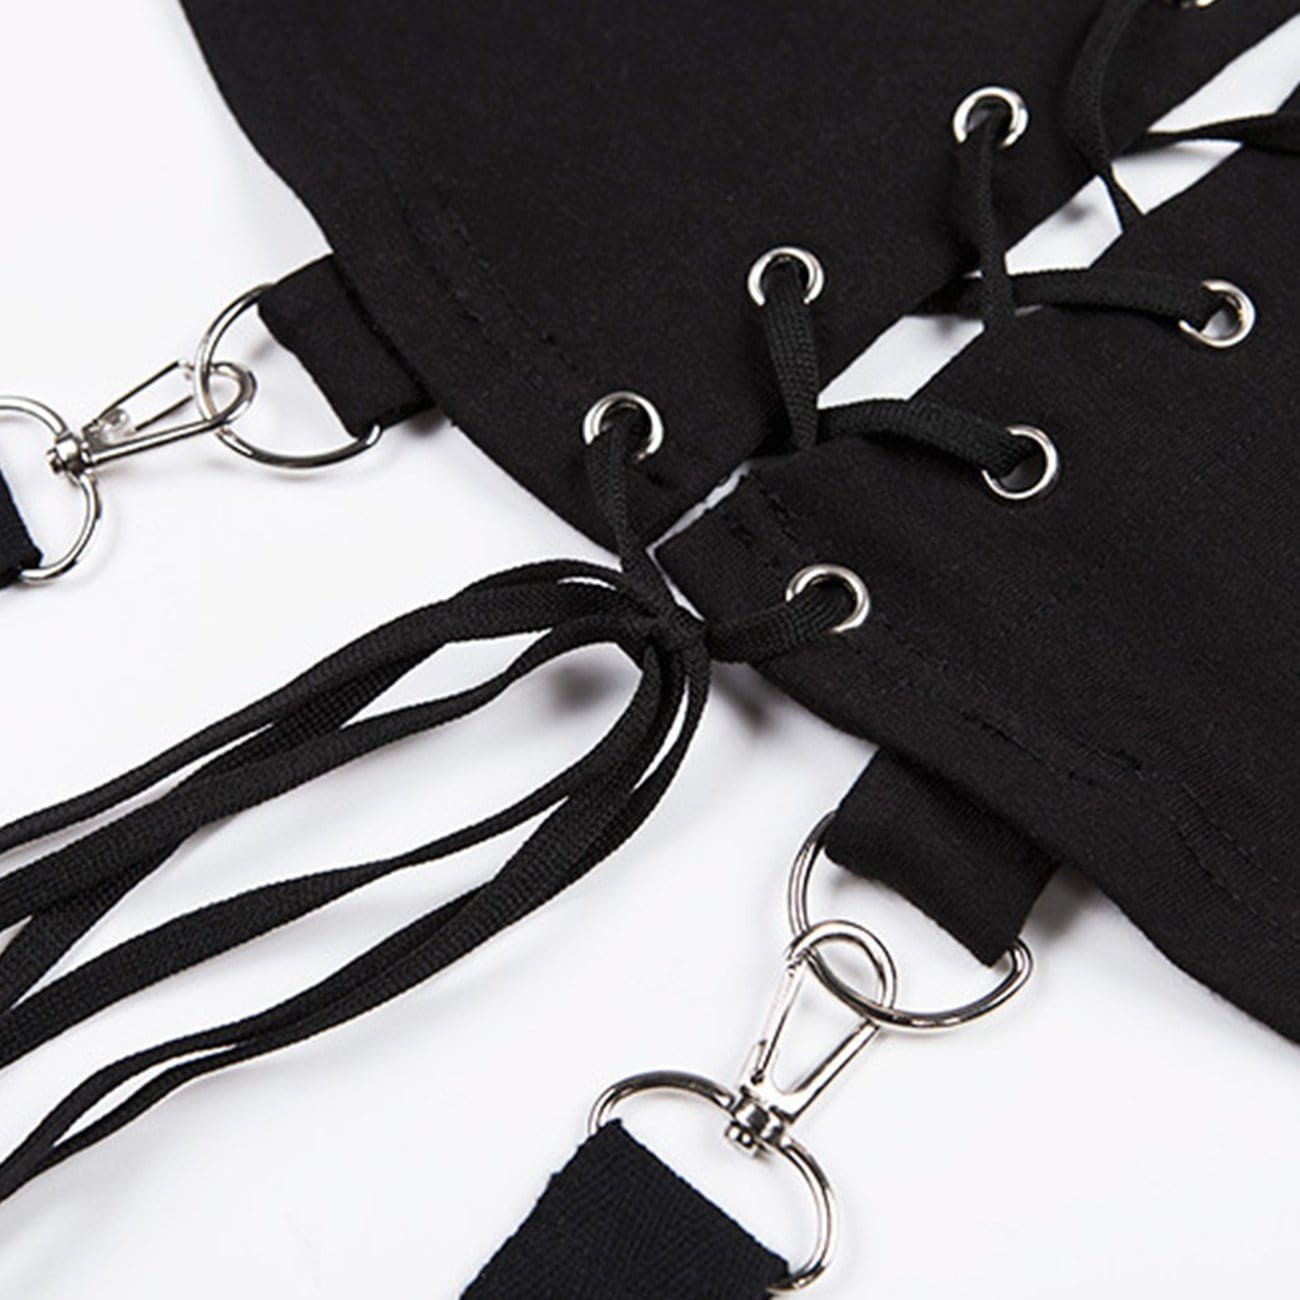 Dark Buttonhole Straps Cropped Hoodie